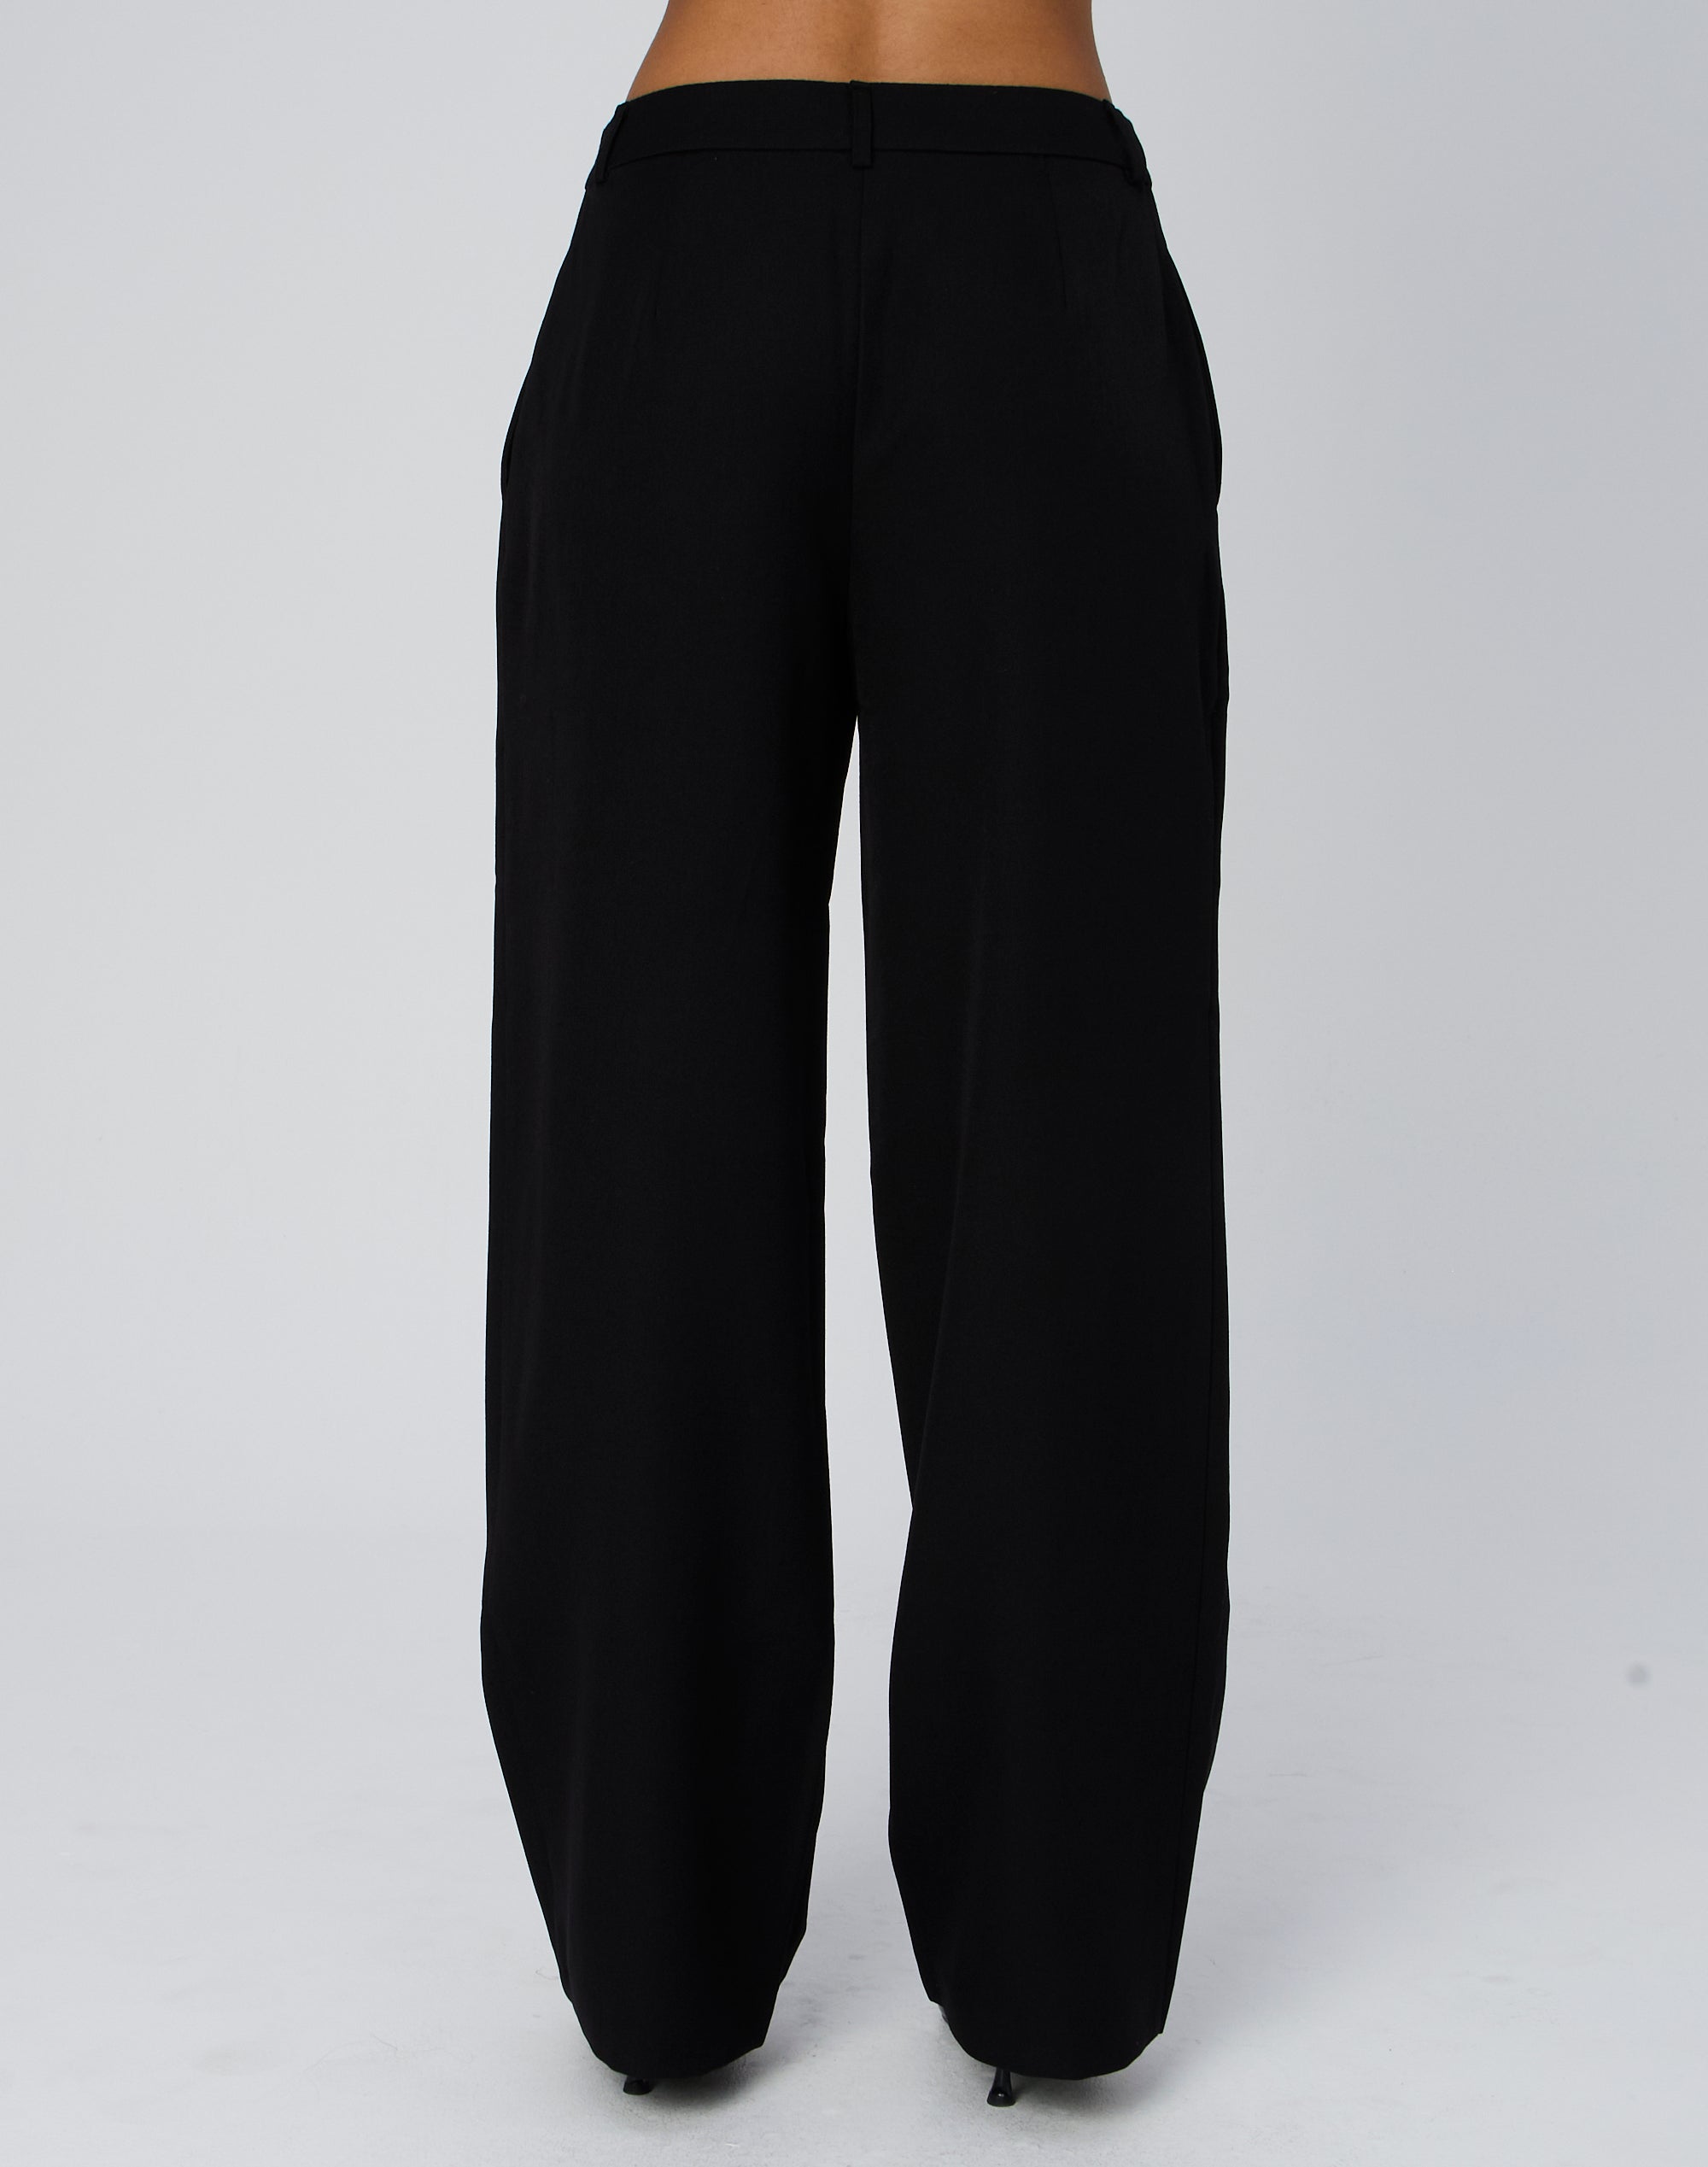 Loose Fit Patterned twill trousers - Black/White checked - Men | H&M IN